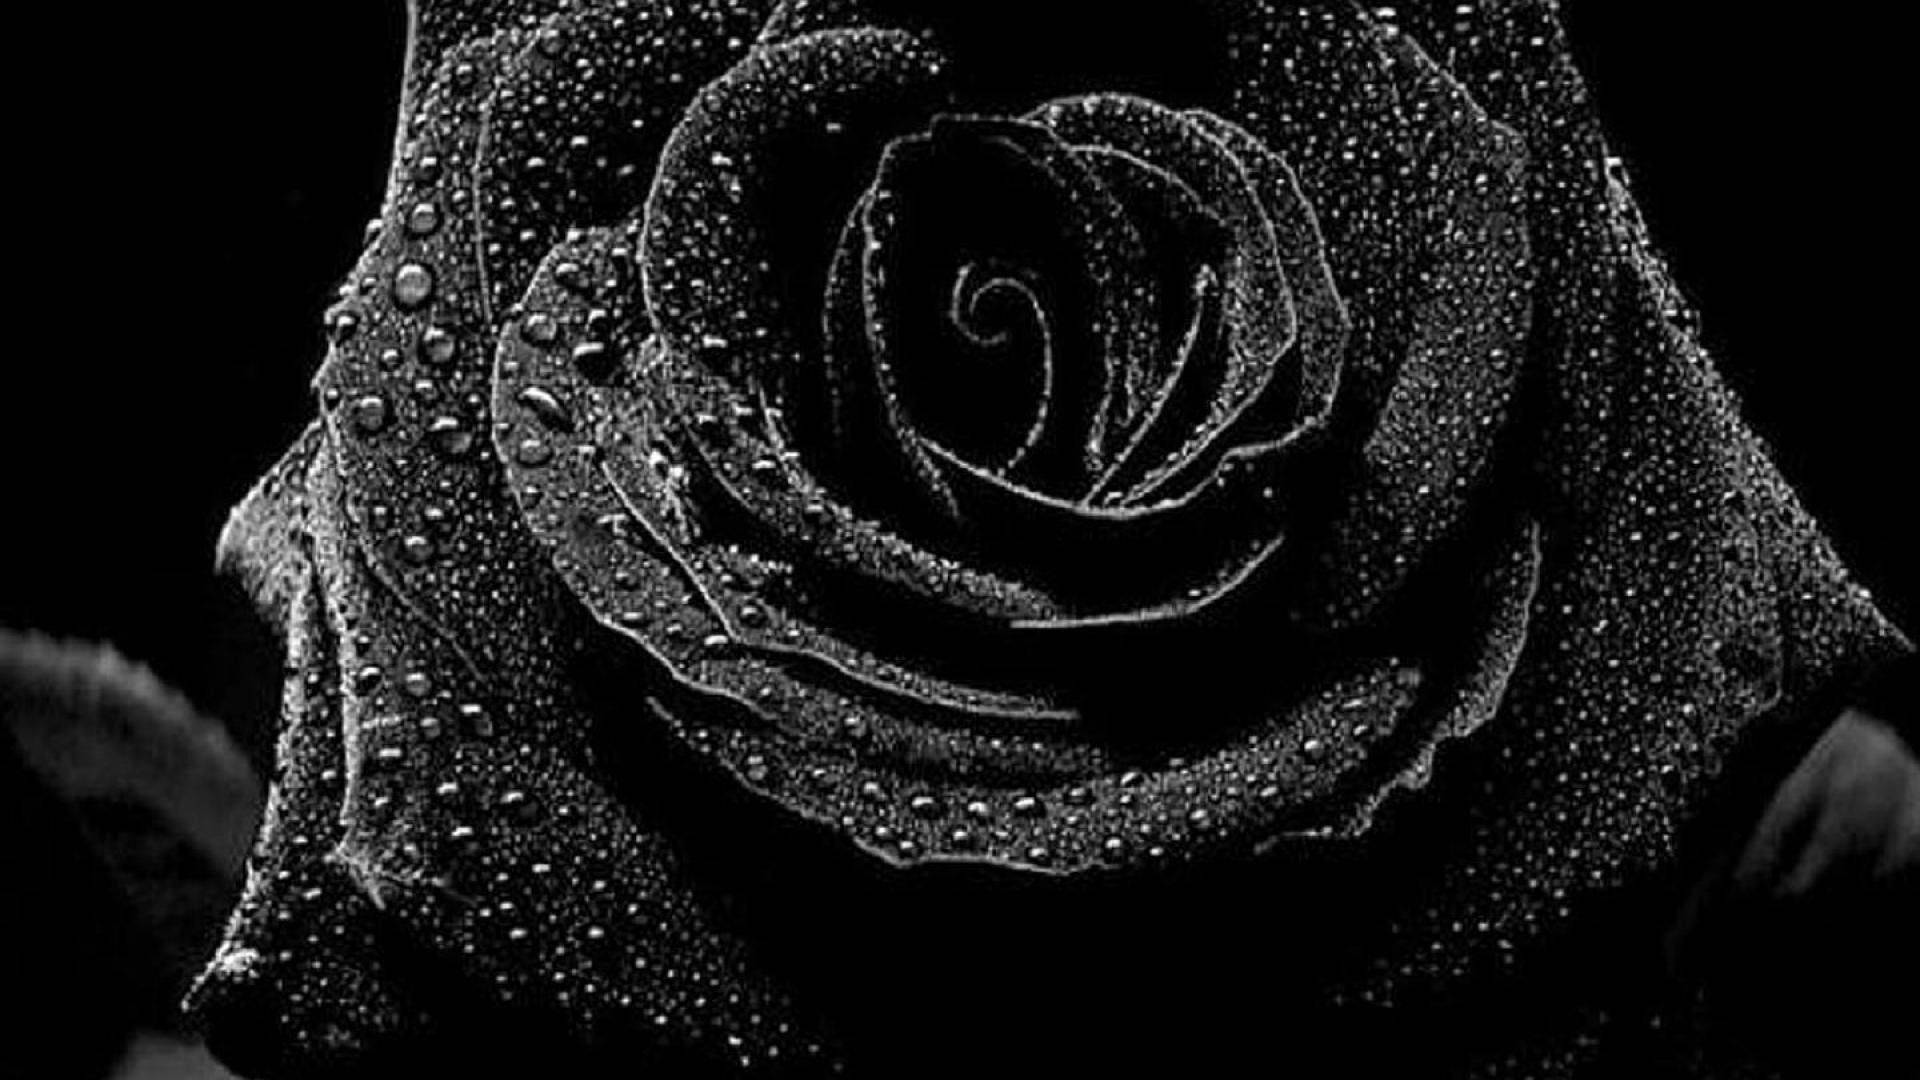 Dewy Black And White Rose Wallpaper